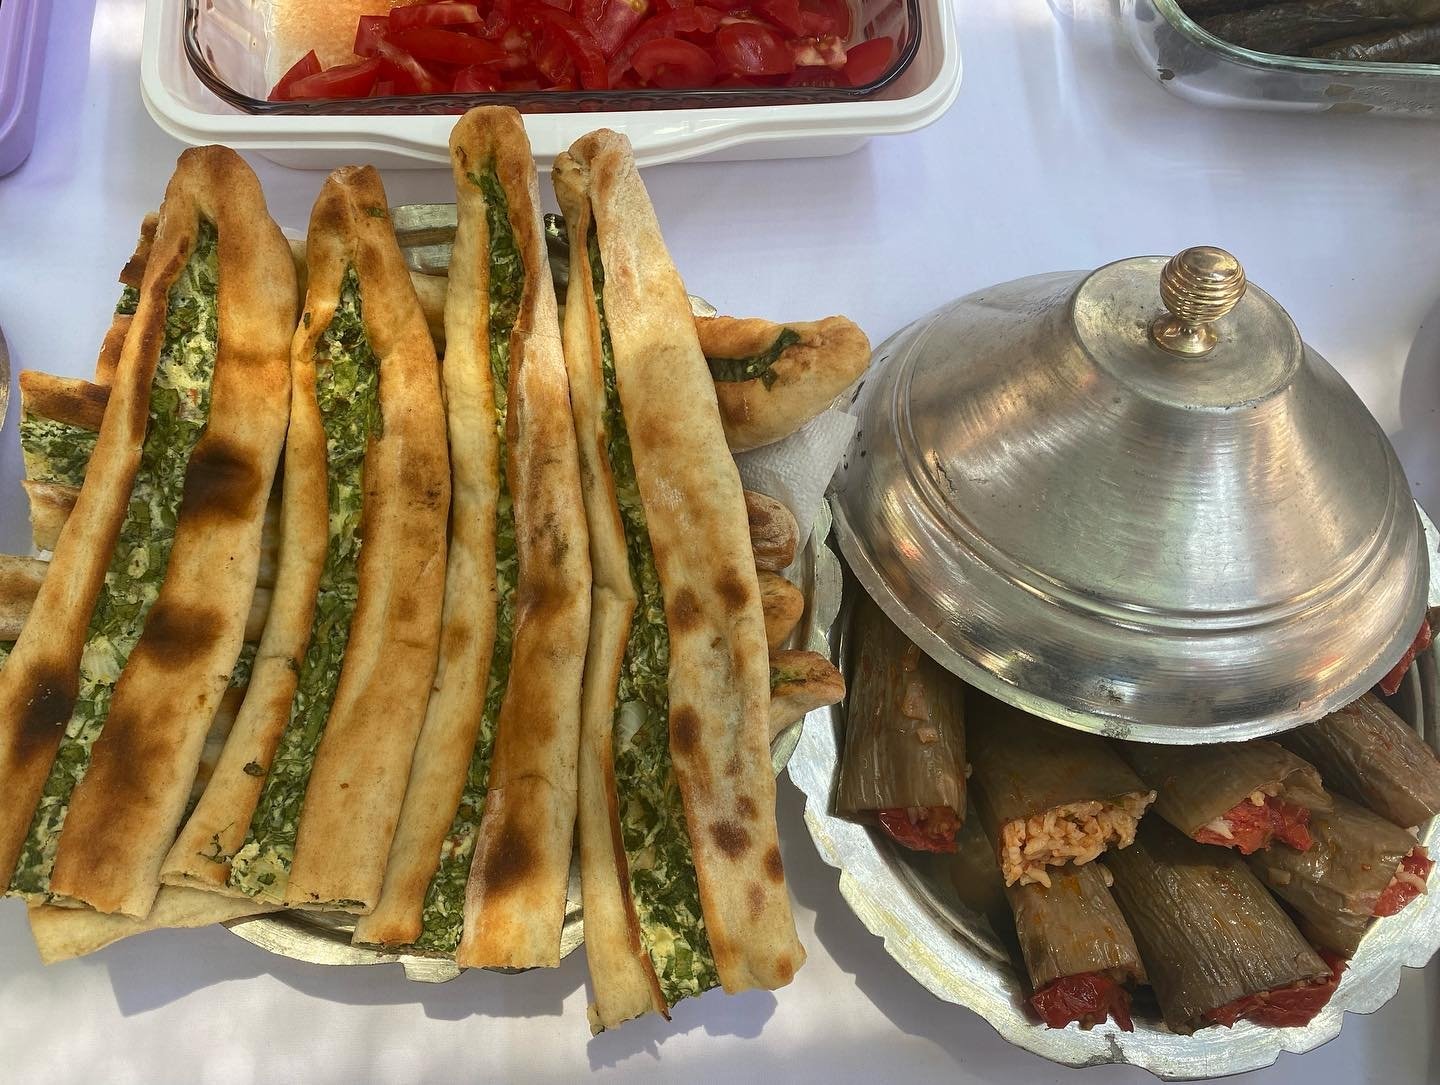 A wide variety of Turkish food is served across many countries as part of the newly launched Turkish Cuisine Week, a festival to promote Turkish cuisine internationally. In this photo, examples of Turkey&#039;s famous spinach pide and stuffed egglant are seen during Turkish Cuisine Week in Denizli, Turkey, May 22, 2022. (AA Photo)